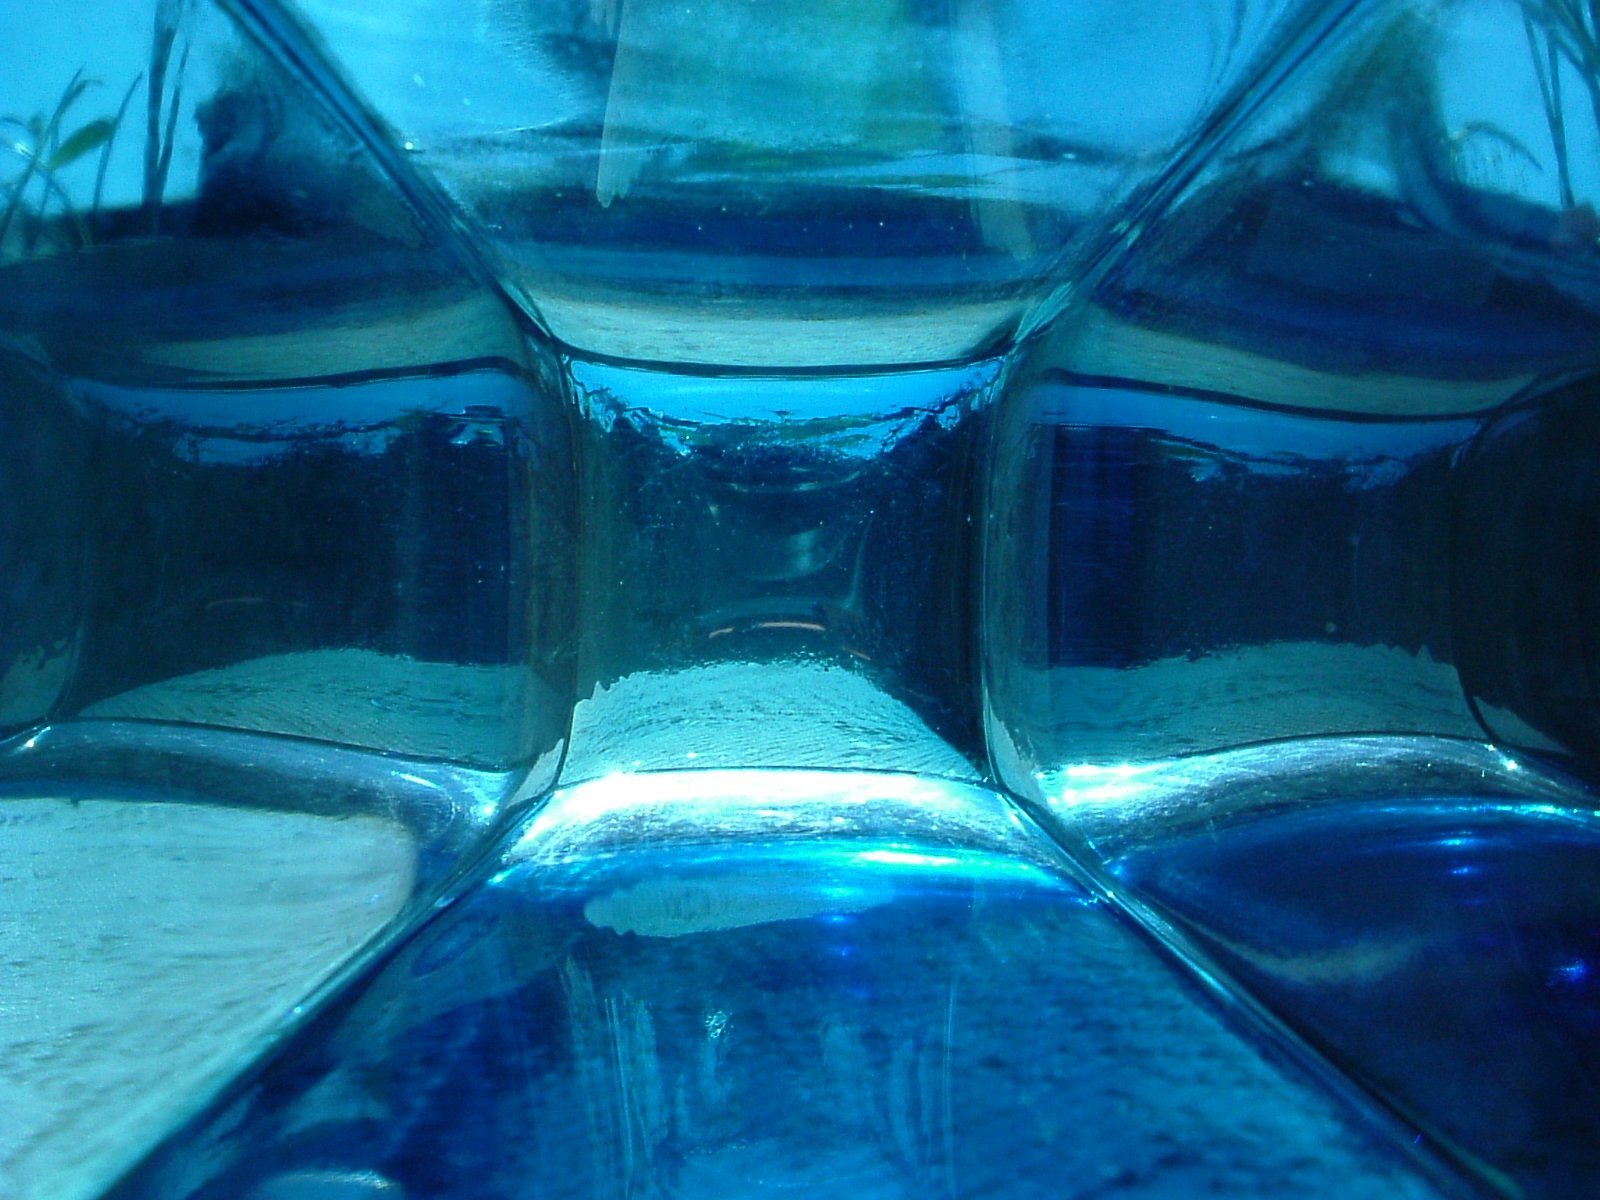 a glass vase is shown in color and pattern